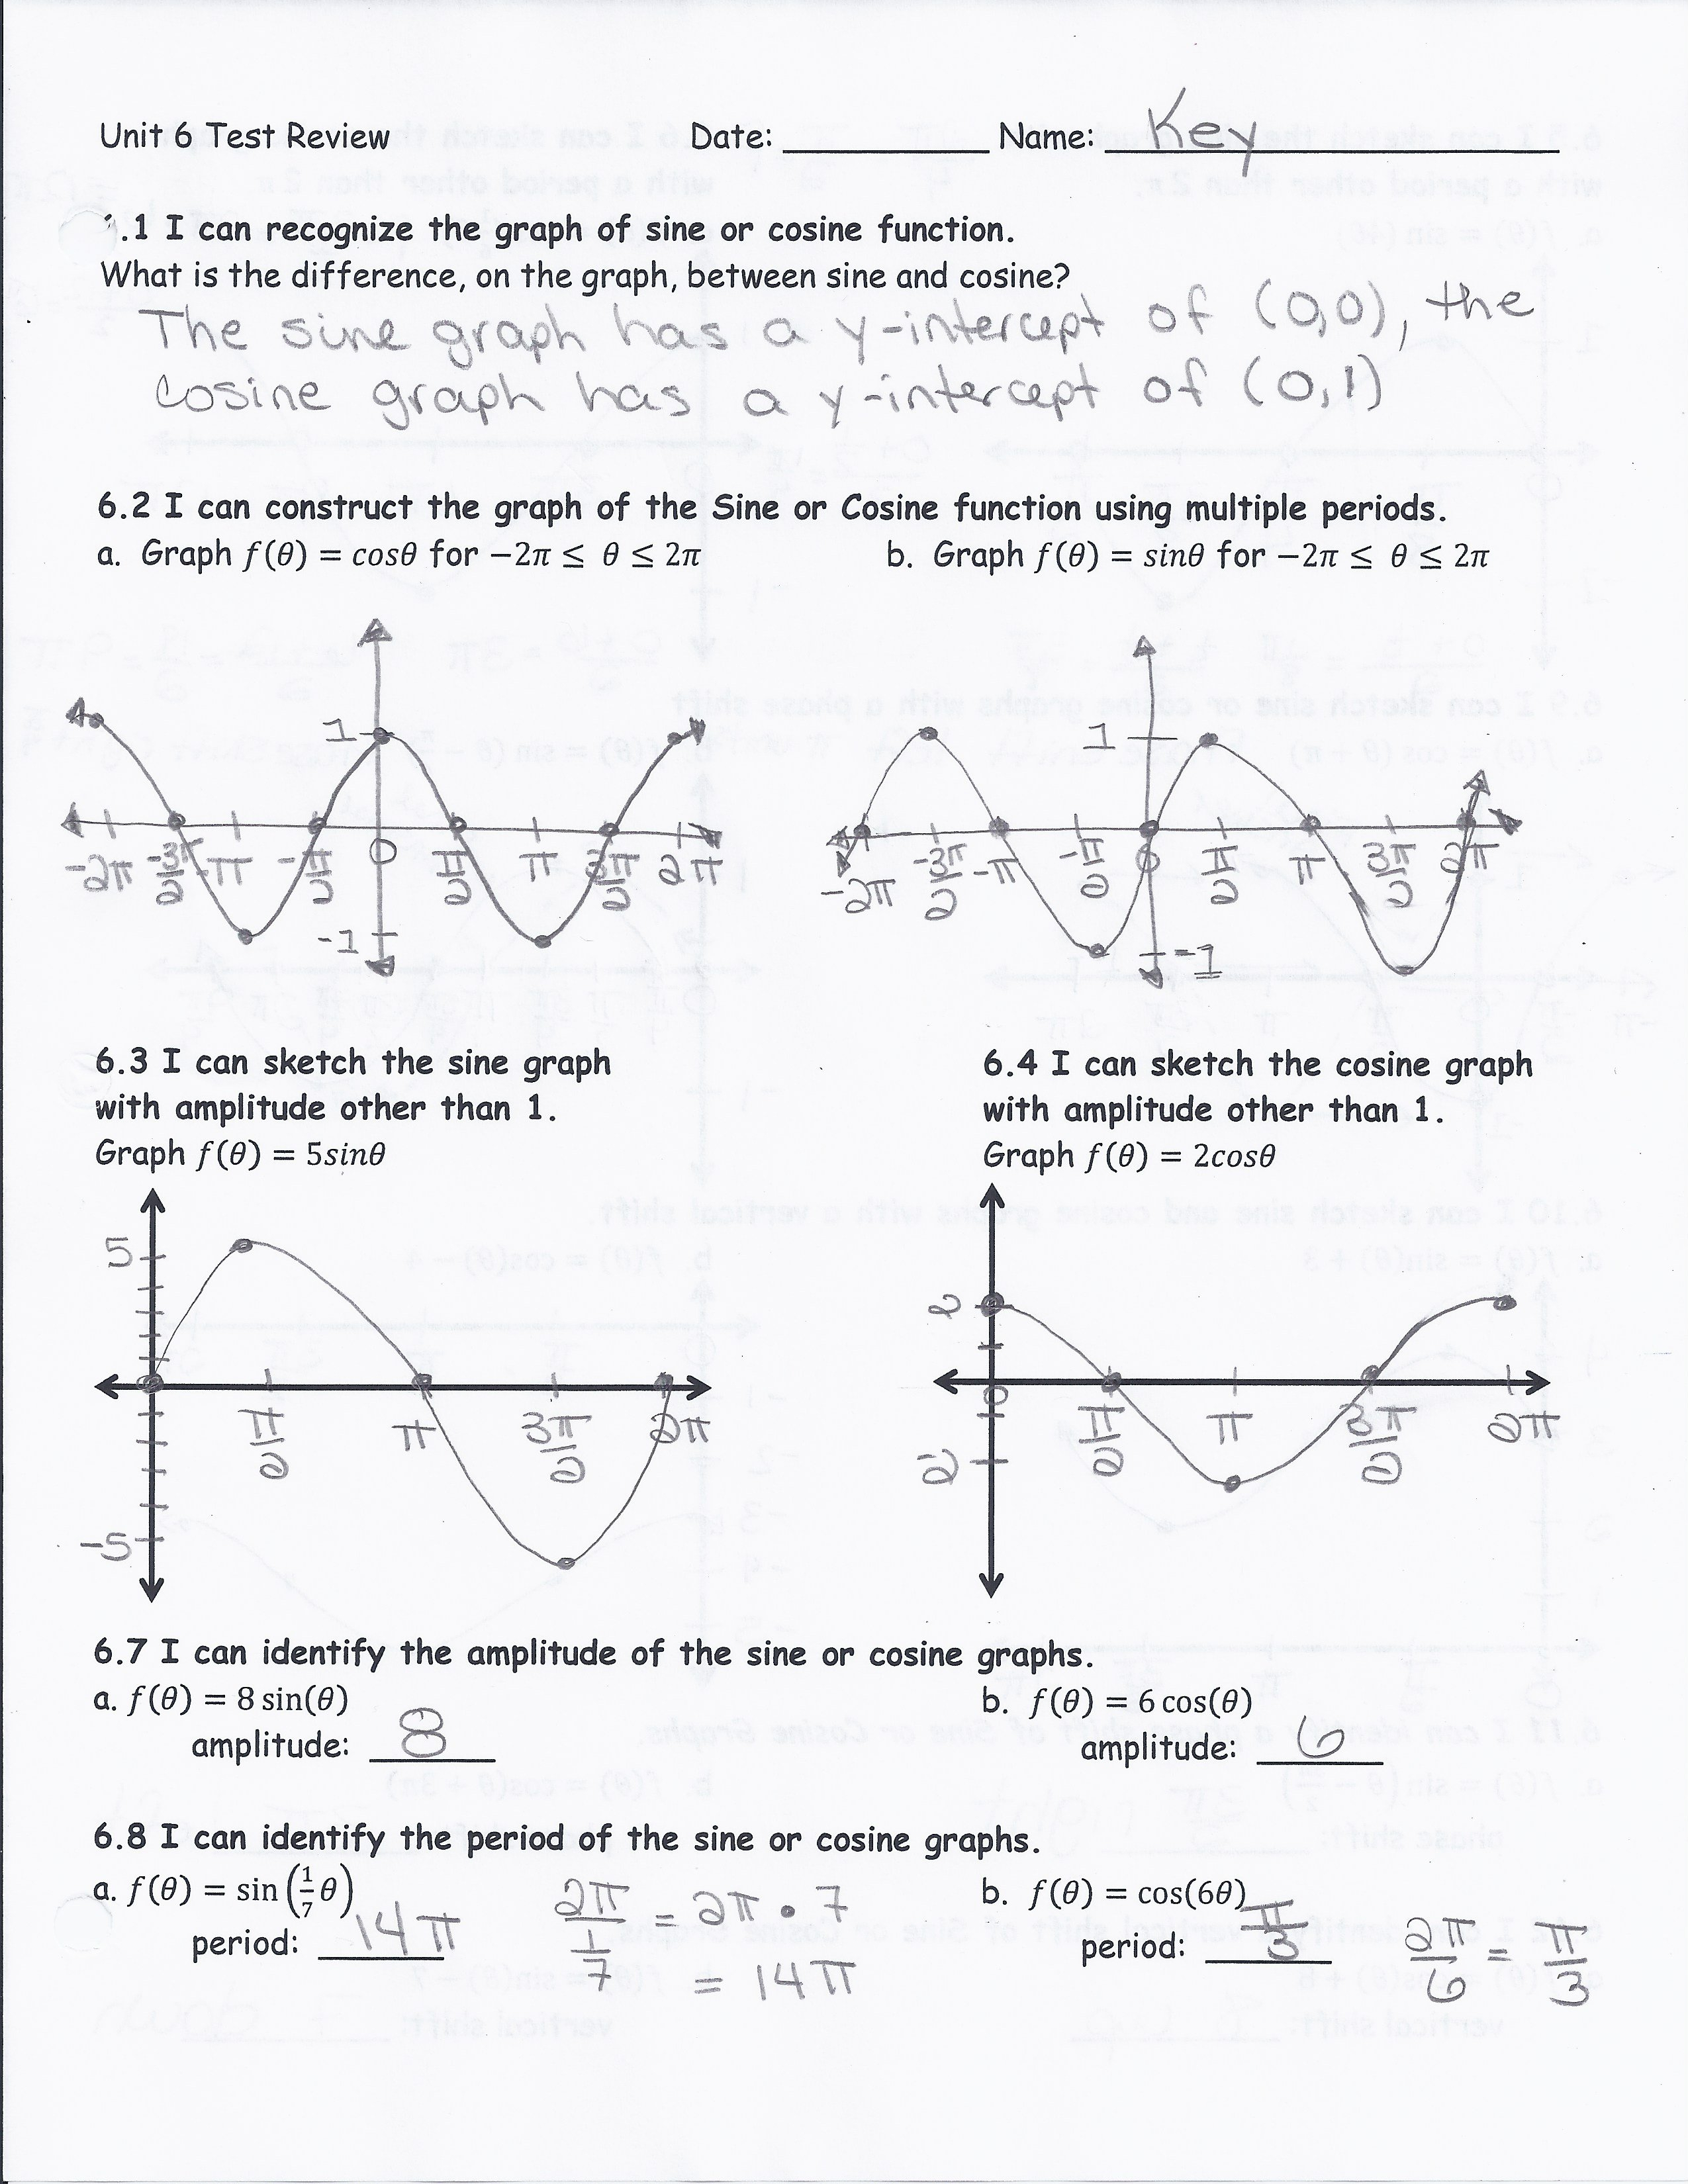 Unit 5 Graphs Of Sine And Cosine Functions  Mrs Anita Koen And Graphing Sine And Cosine Functions Worksheet Answers